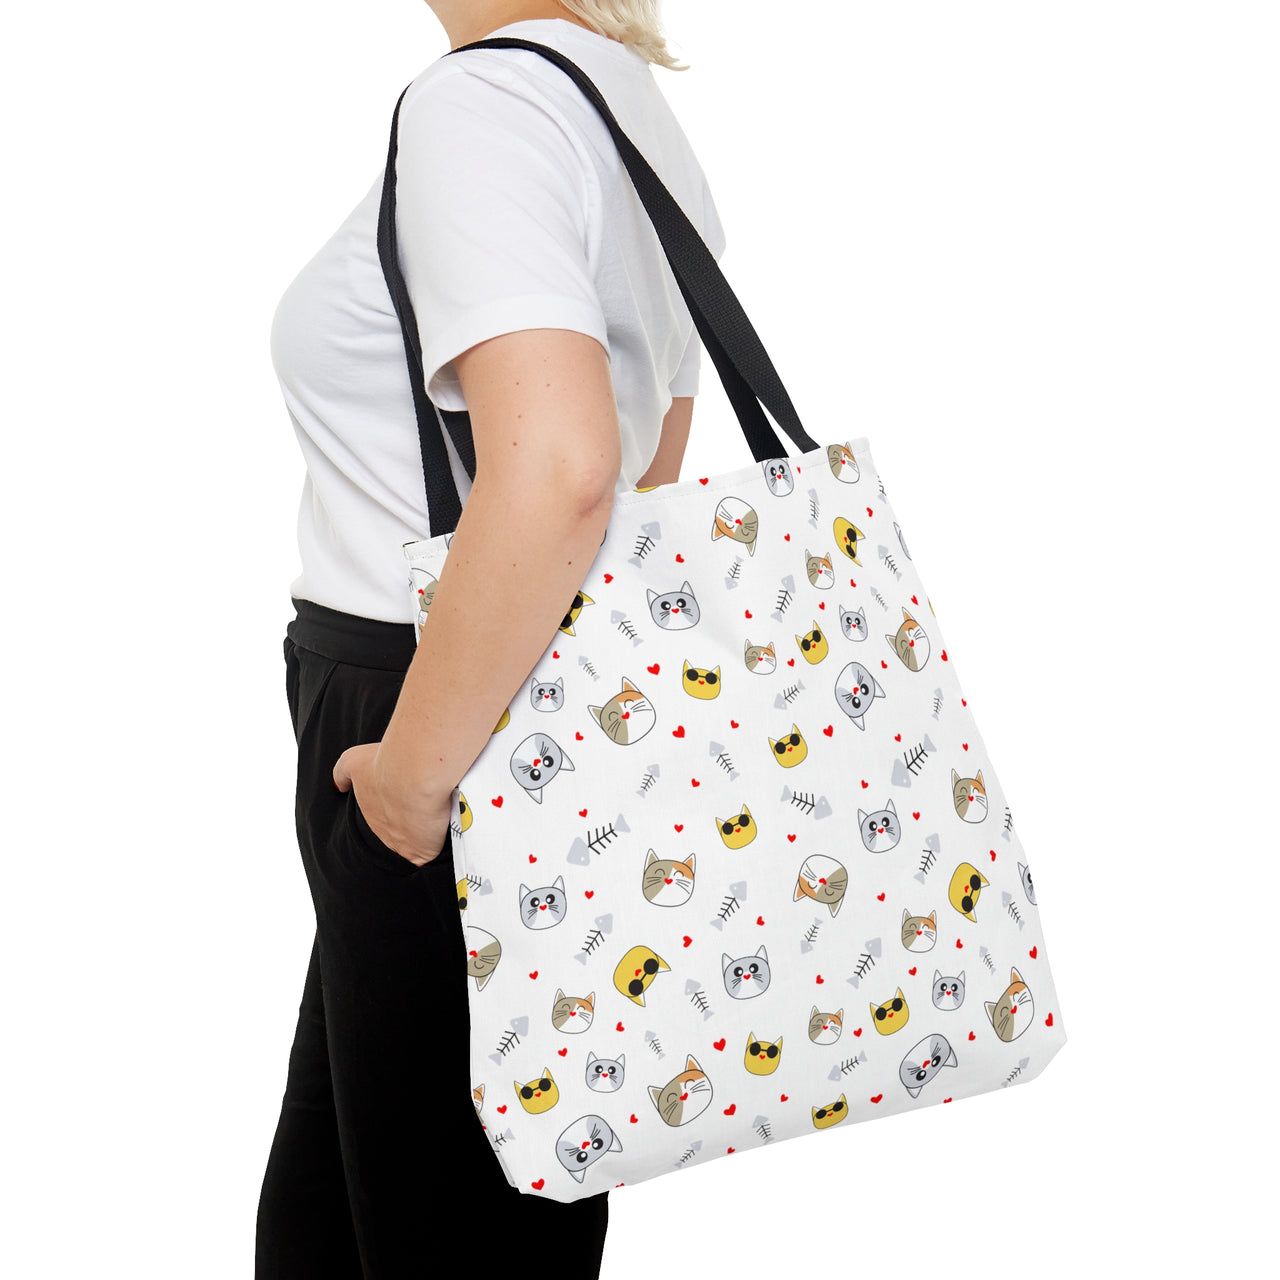 Cat Faces White Large Tote Bag